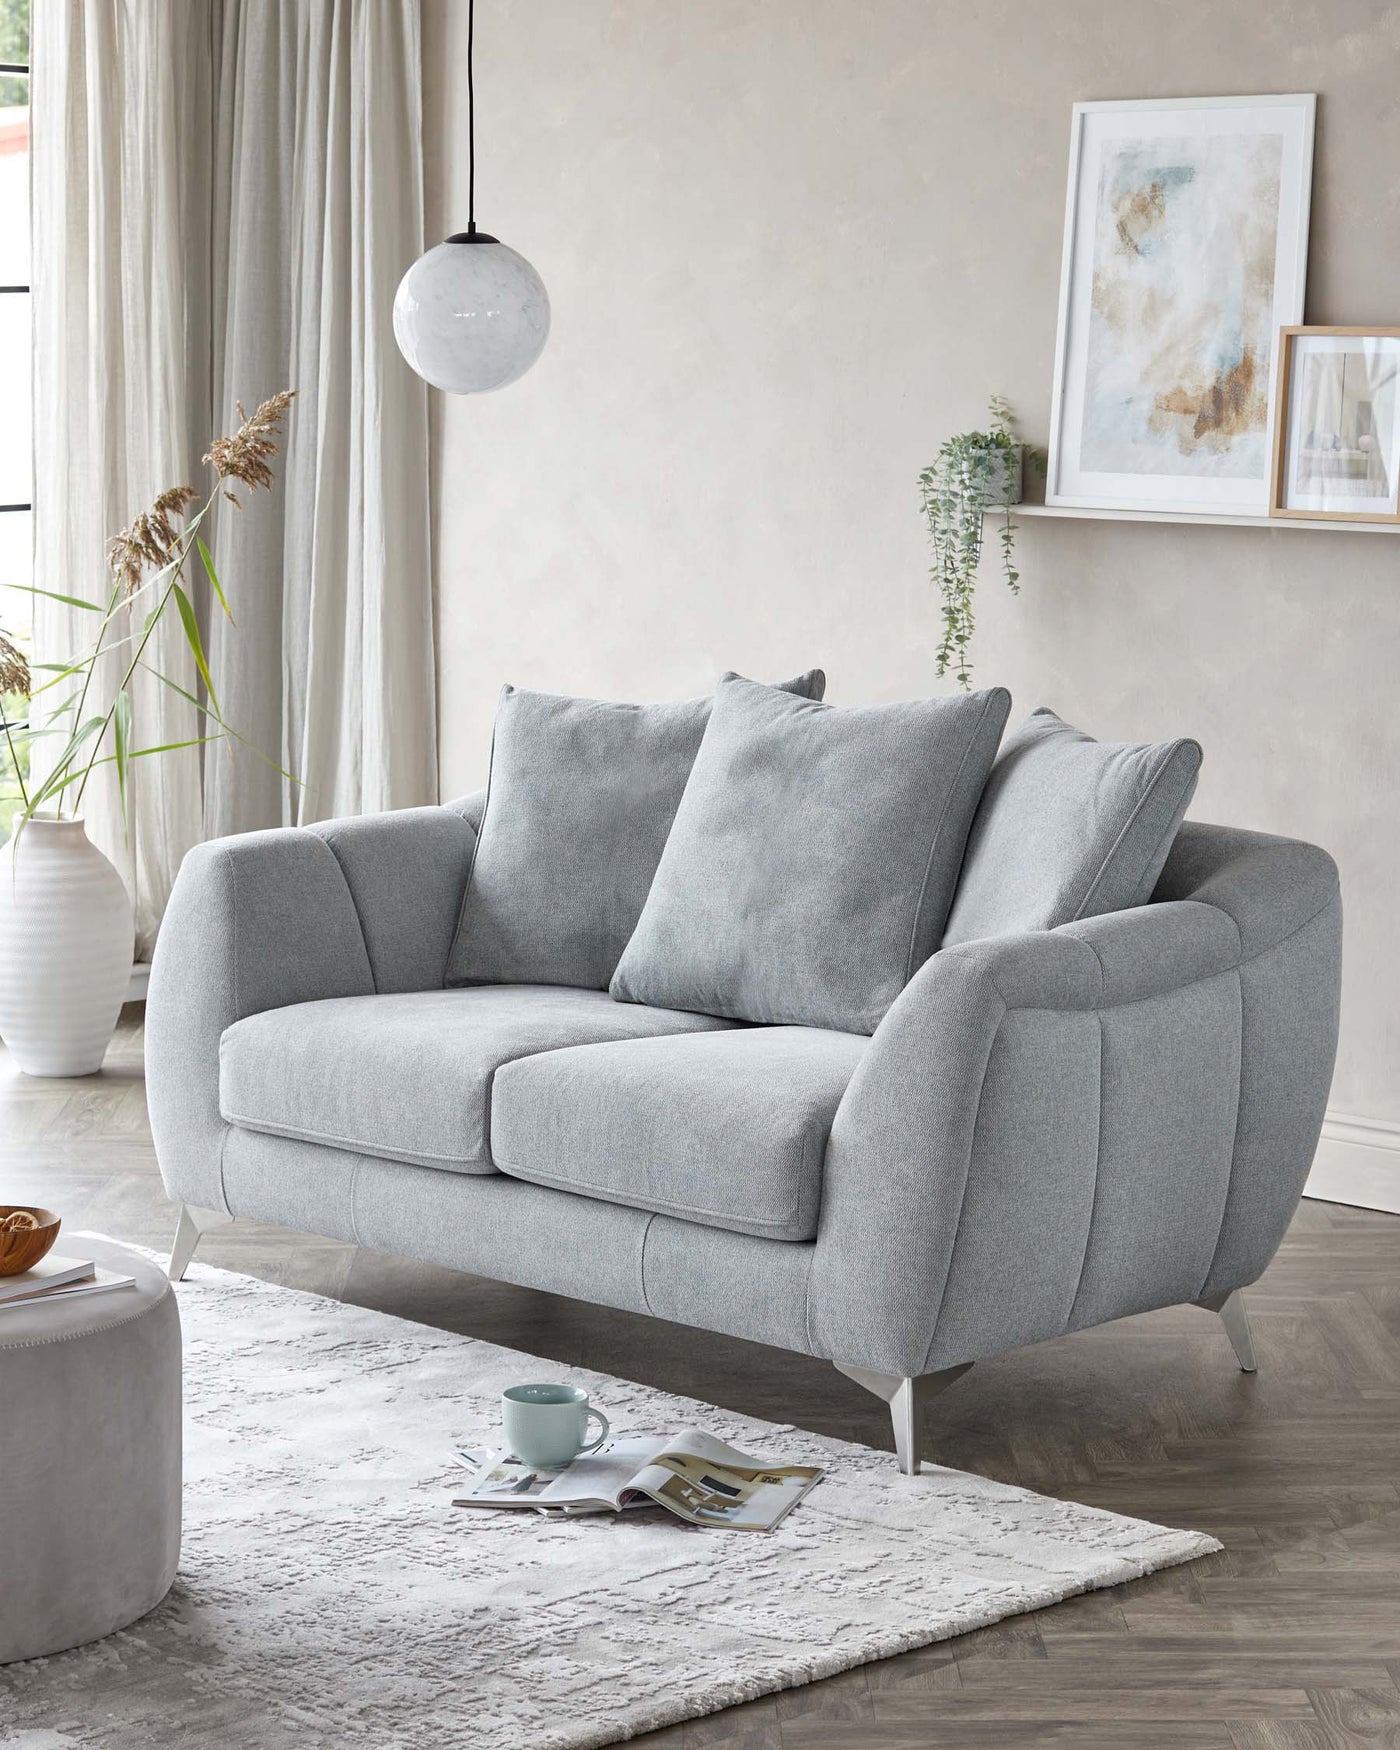 A contemporary light grey fabric sofa with a curved silhouette and sleek metal legs, paired with a rounded off-white ottoman with storage function, set upon a textured white area rug. The scene includes a minimalistic white pendant lamp and is accented with neutral-toned wall art and a green houseplant for a subtle touch of colour and life.